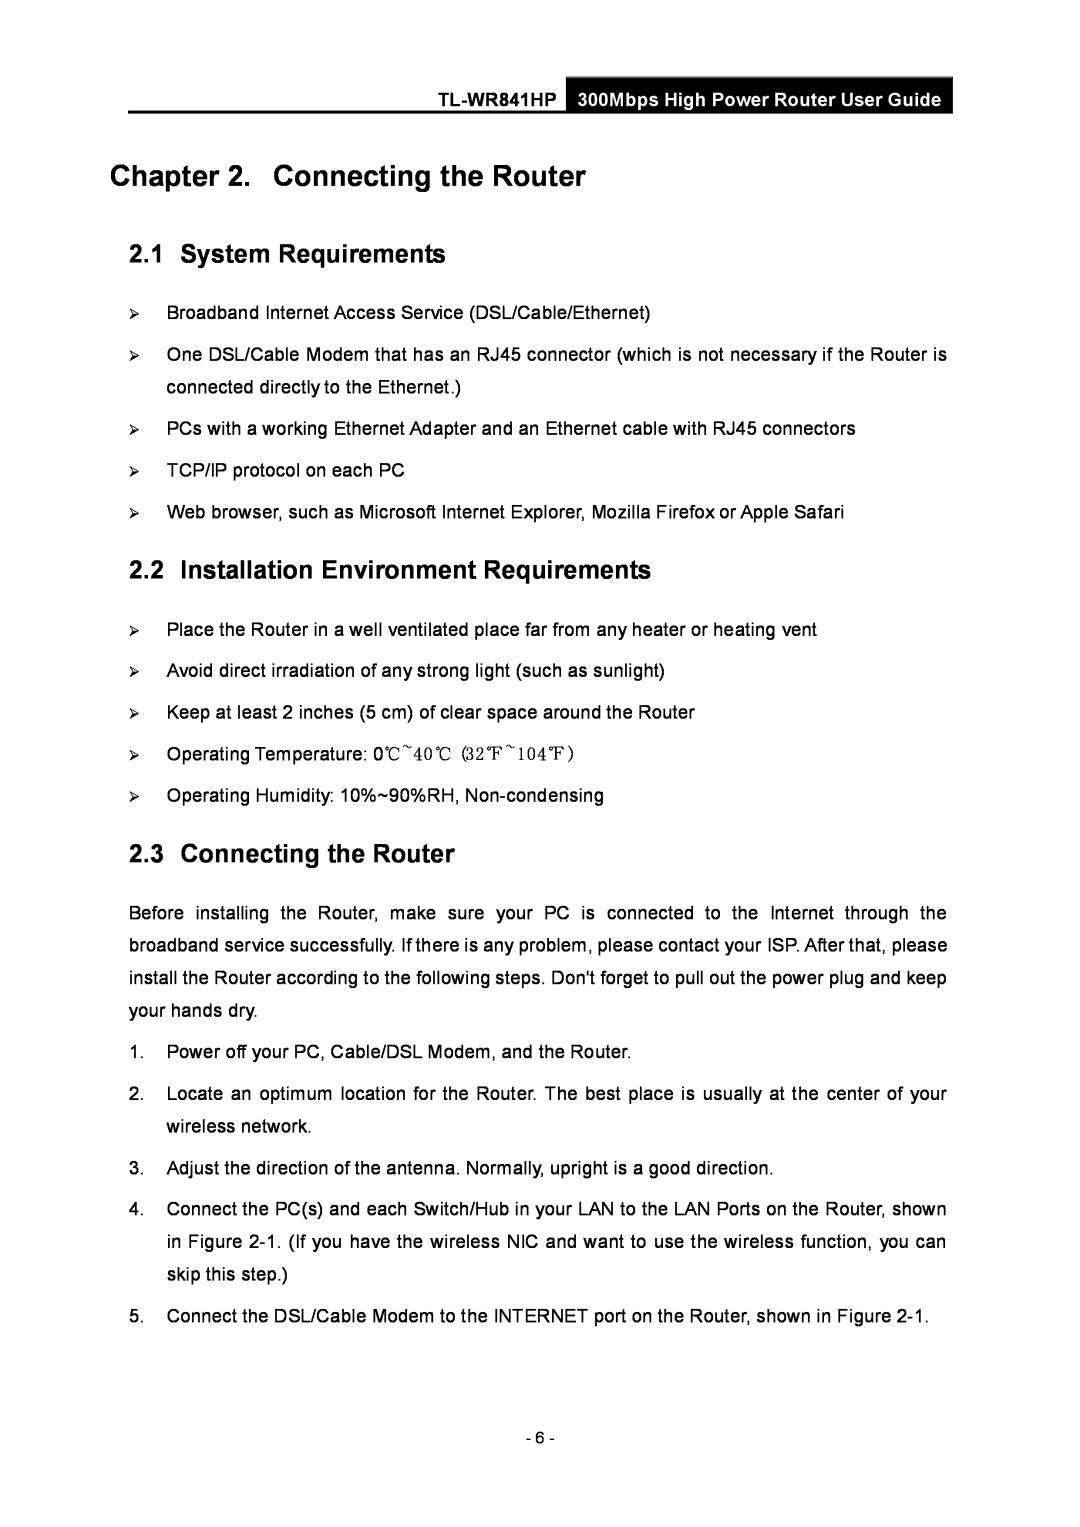 TP-Link Rev 1.0.0 1910010810 manual Connecting the Router, System Requirements, Installation Environment Requirements 